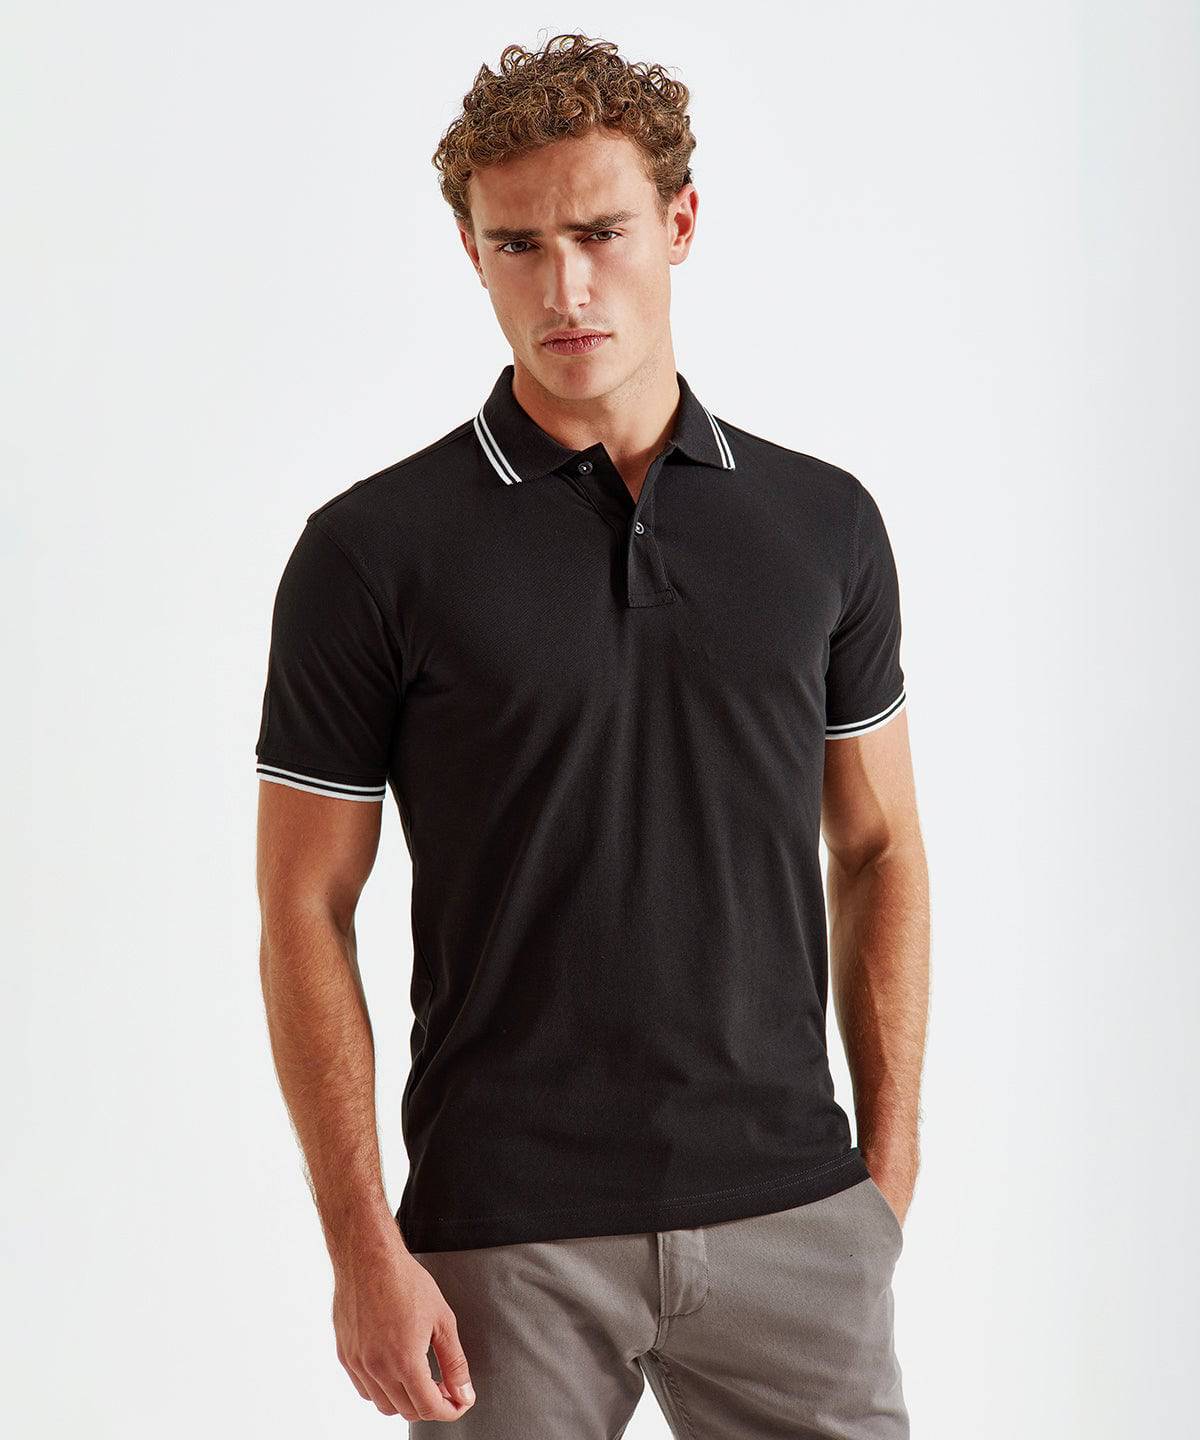 Cornflower/Navy - Men's classic fit tipped polo